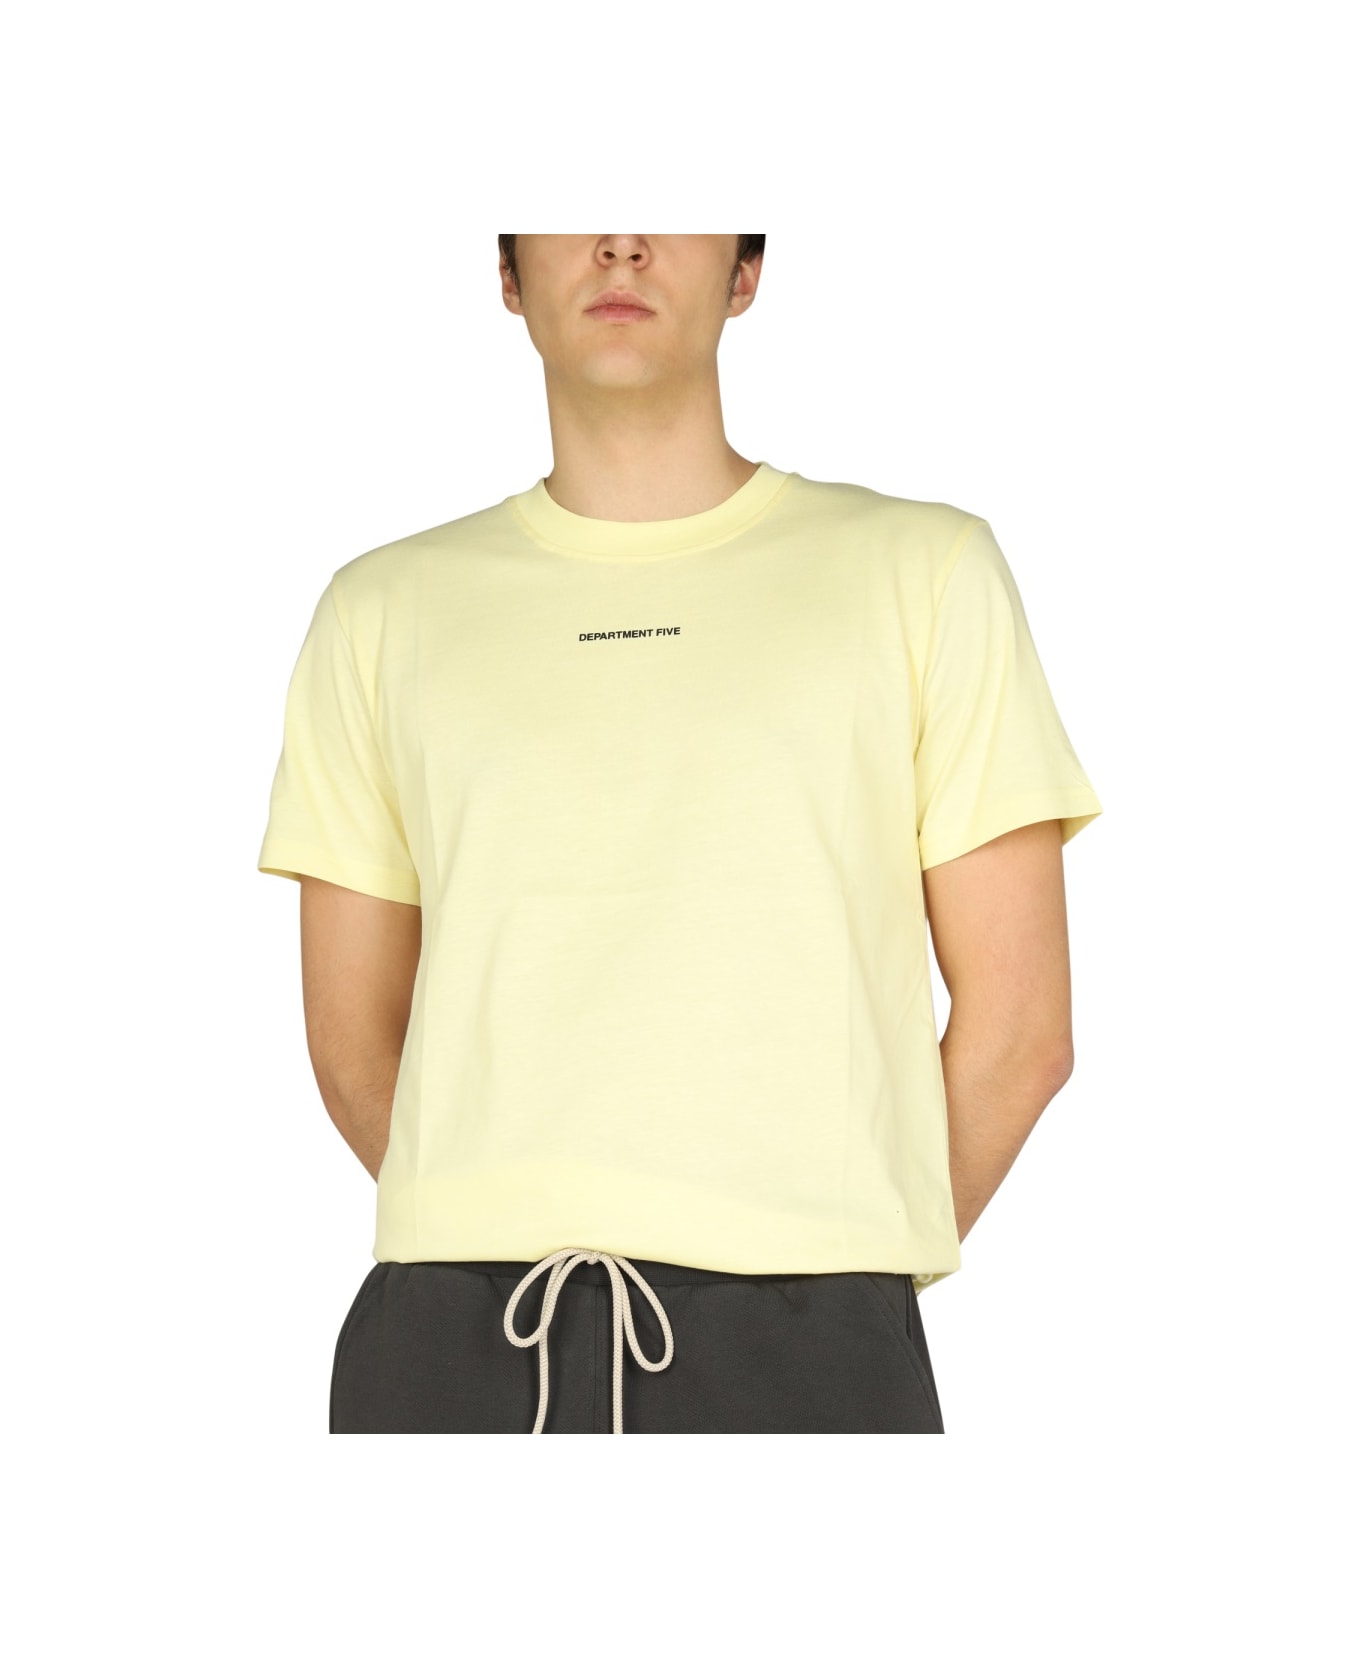 Department Five "aleph" T-shirt - YELLOW